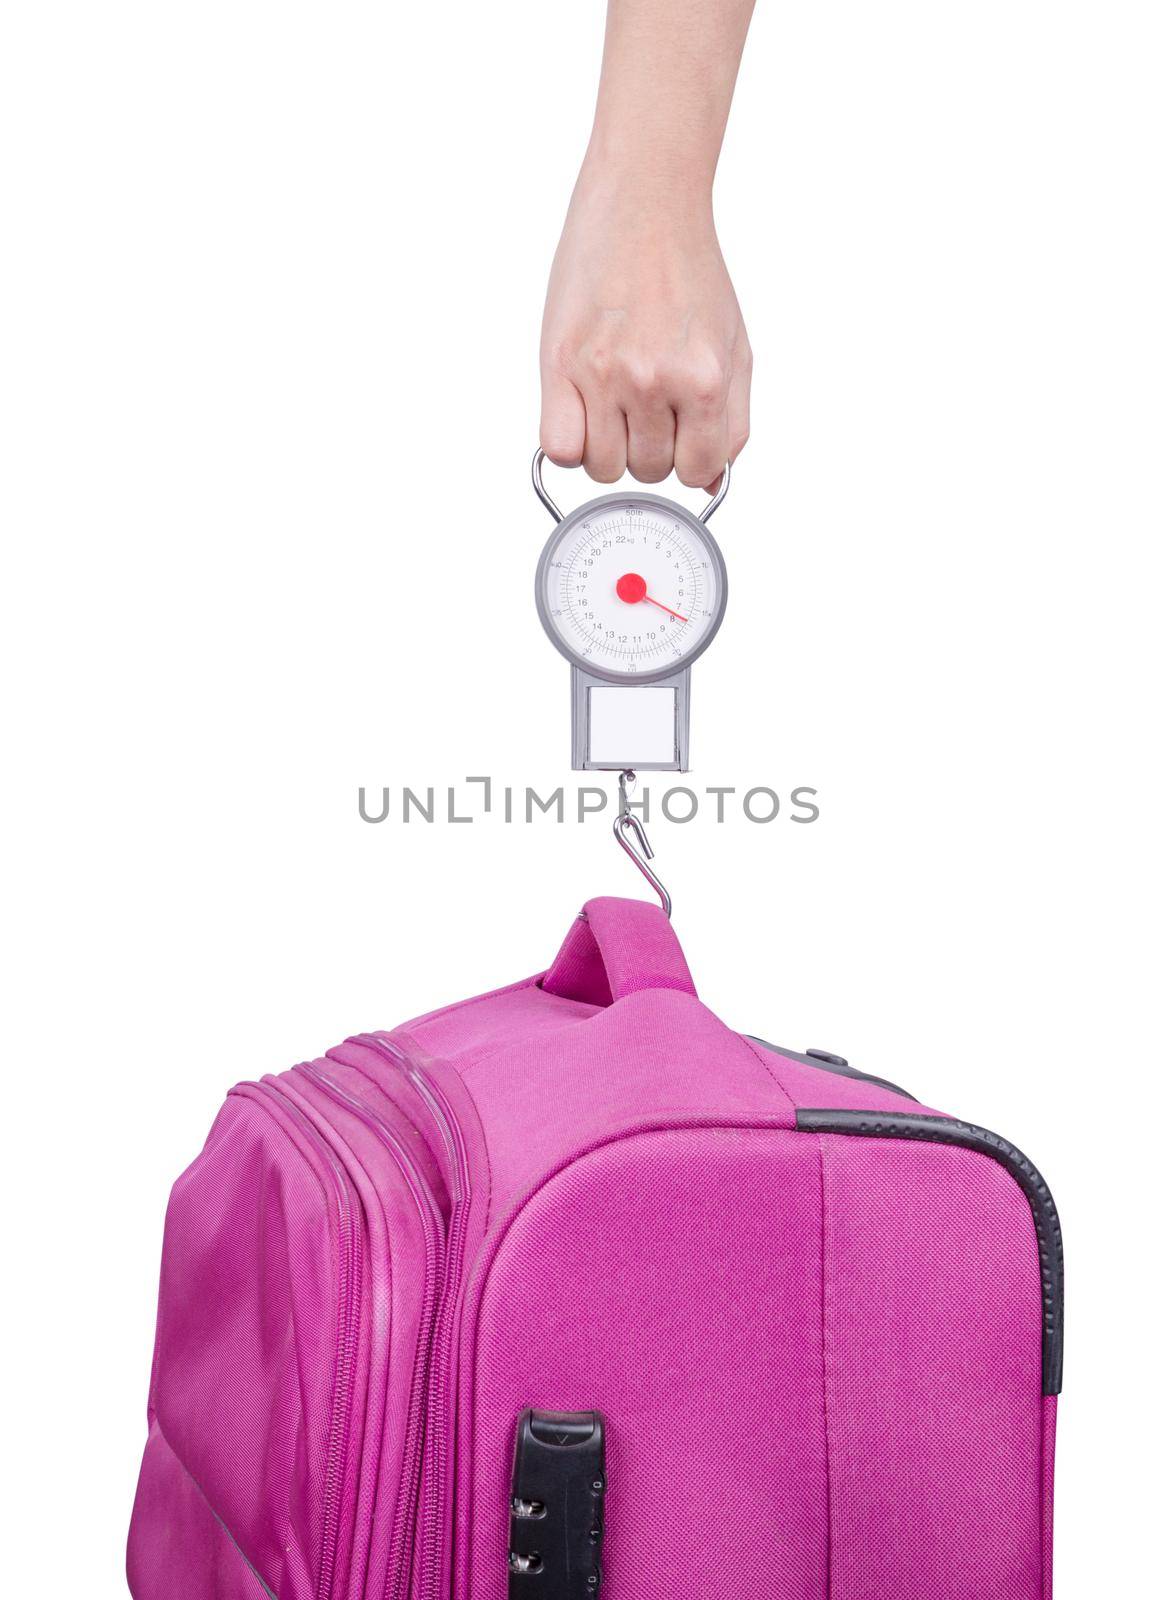 Passenger checking luggage weight with scale before flight isolated on white  by geargodz